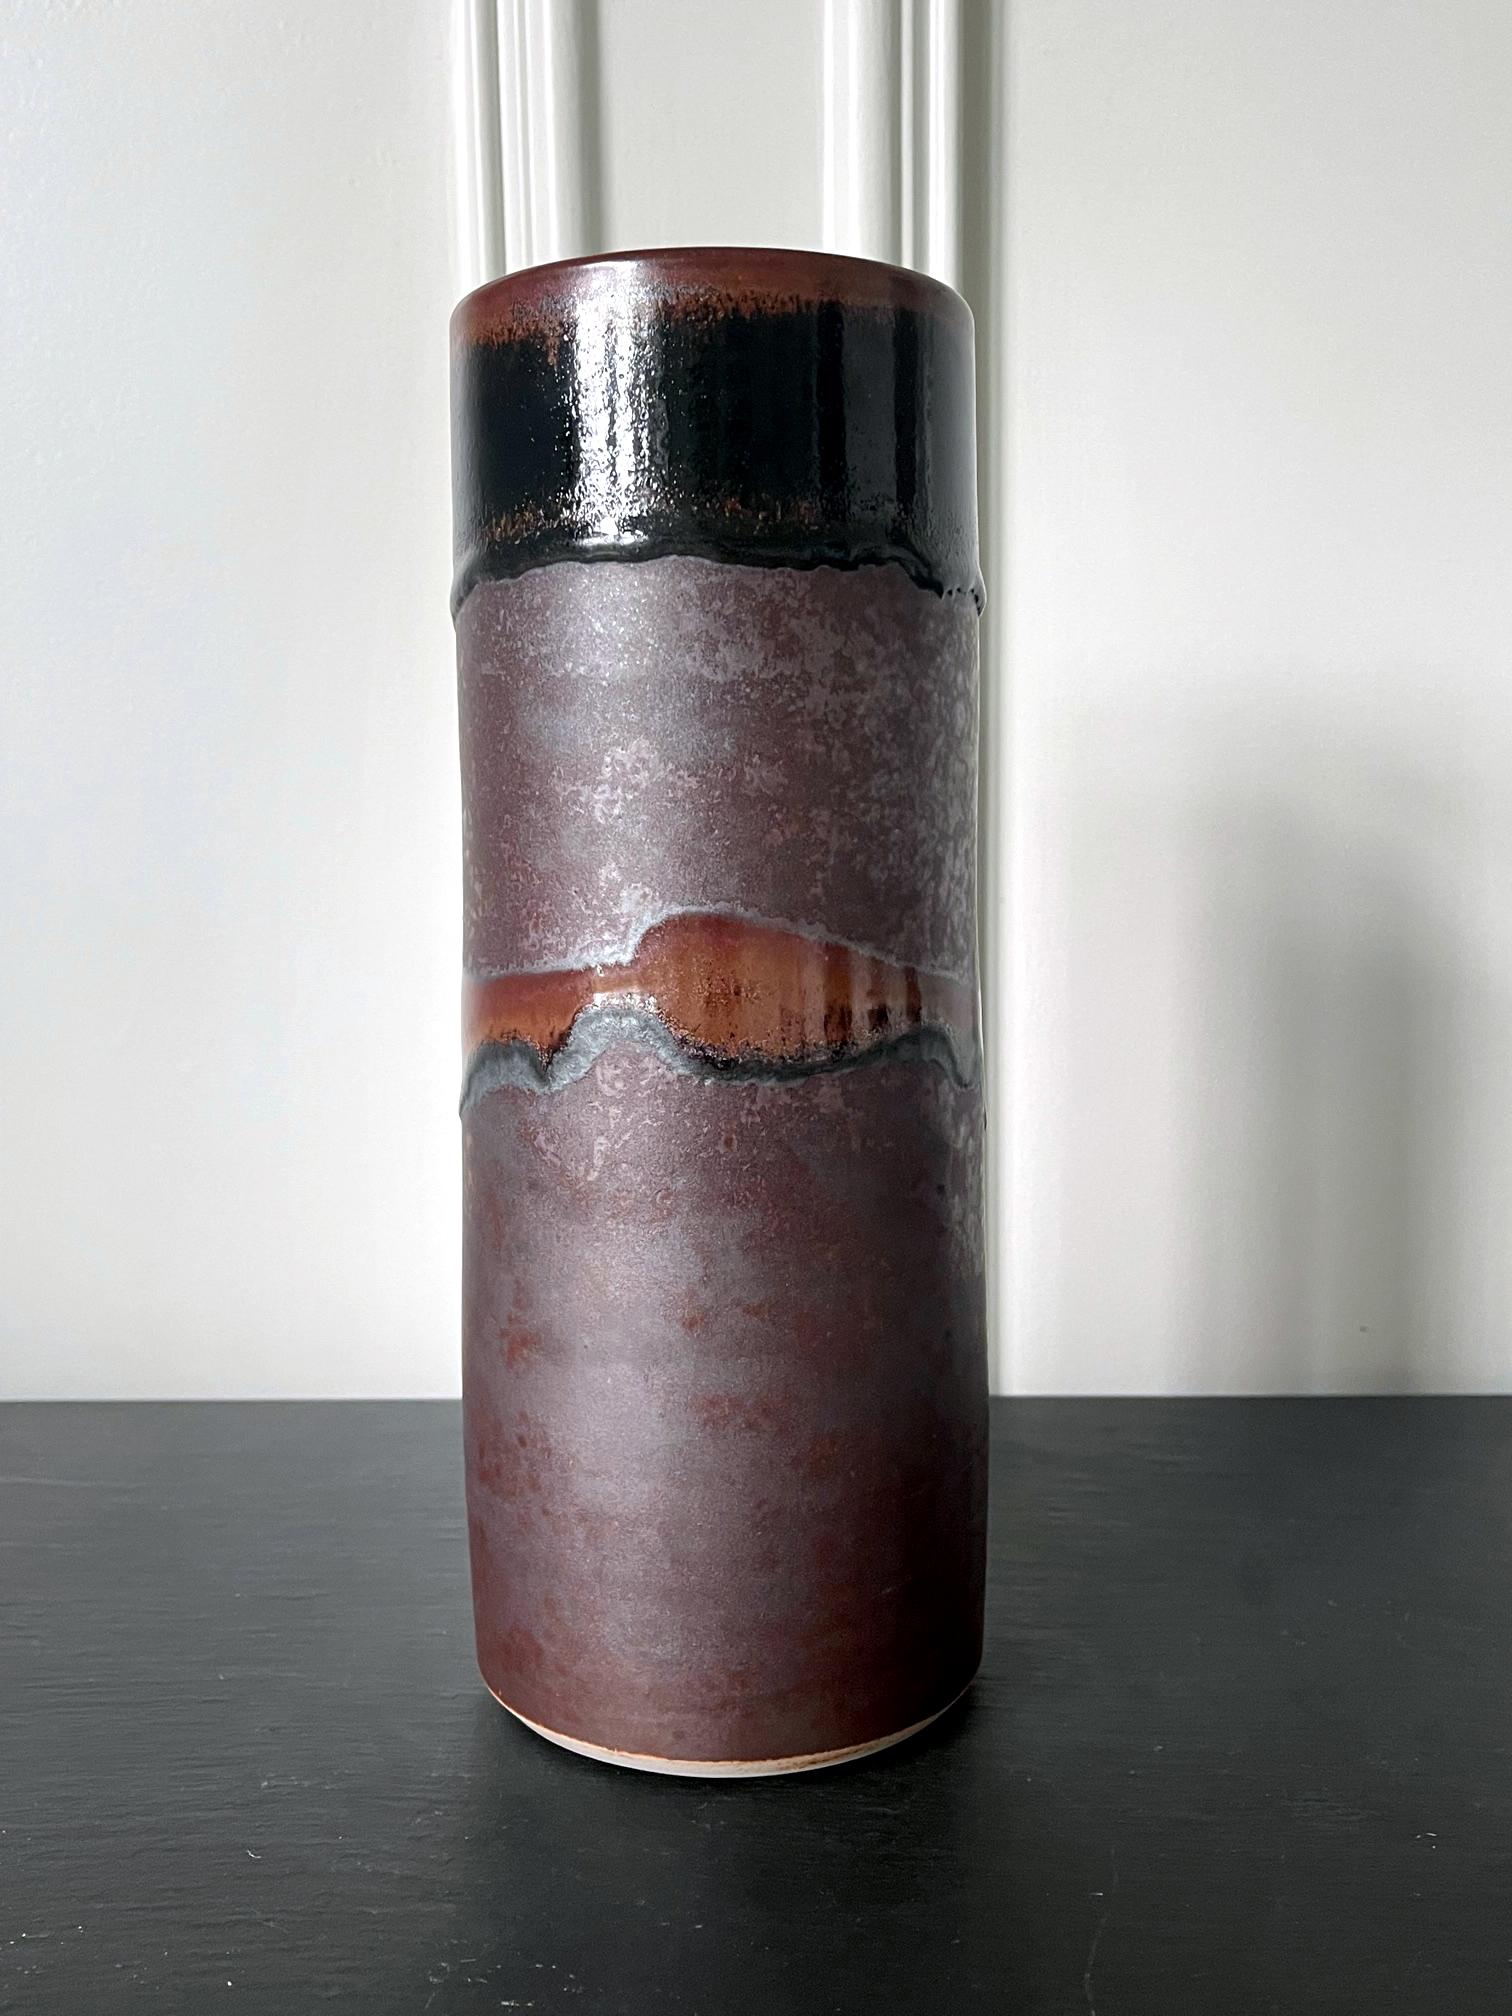 An early ceramic vase in a slightly tapered cylinder form by potter Brother Thomas Bezanson (1929-2007). The minimalistic silouette is strikingly primordial with its wider mouth rim in the perfect circle, bringing to mind the Chinese neolithic Jade